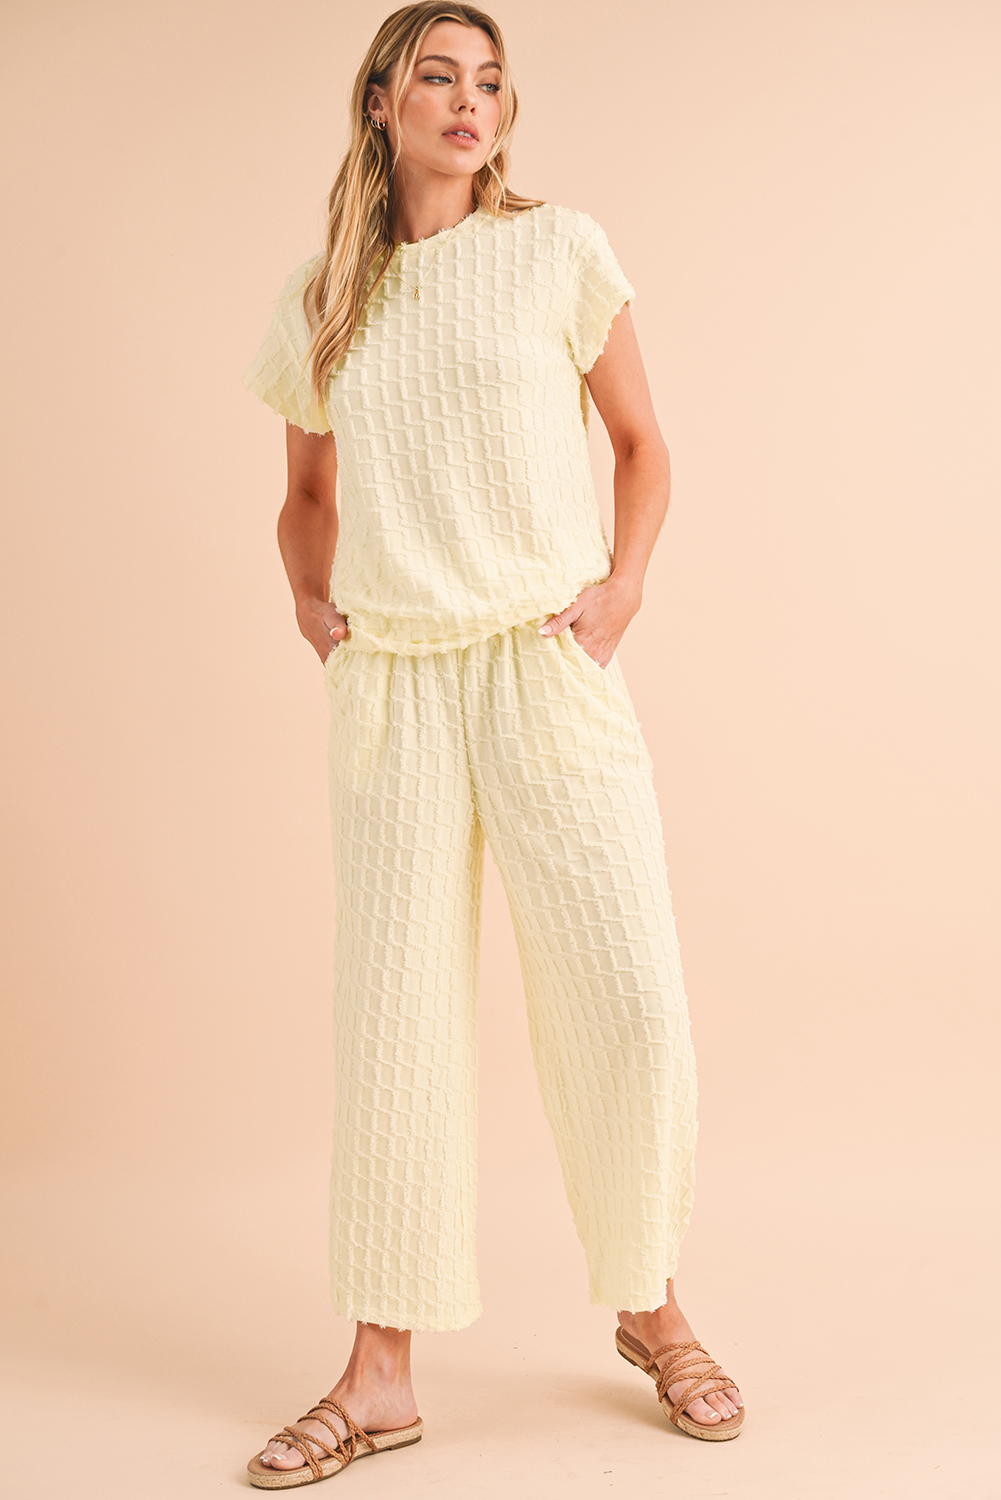 Shewin Wholesale Western Apricot Lattice Textured Tee and Wide Leg PANTS Two-Piece Set